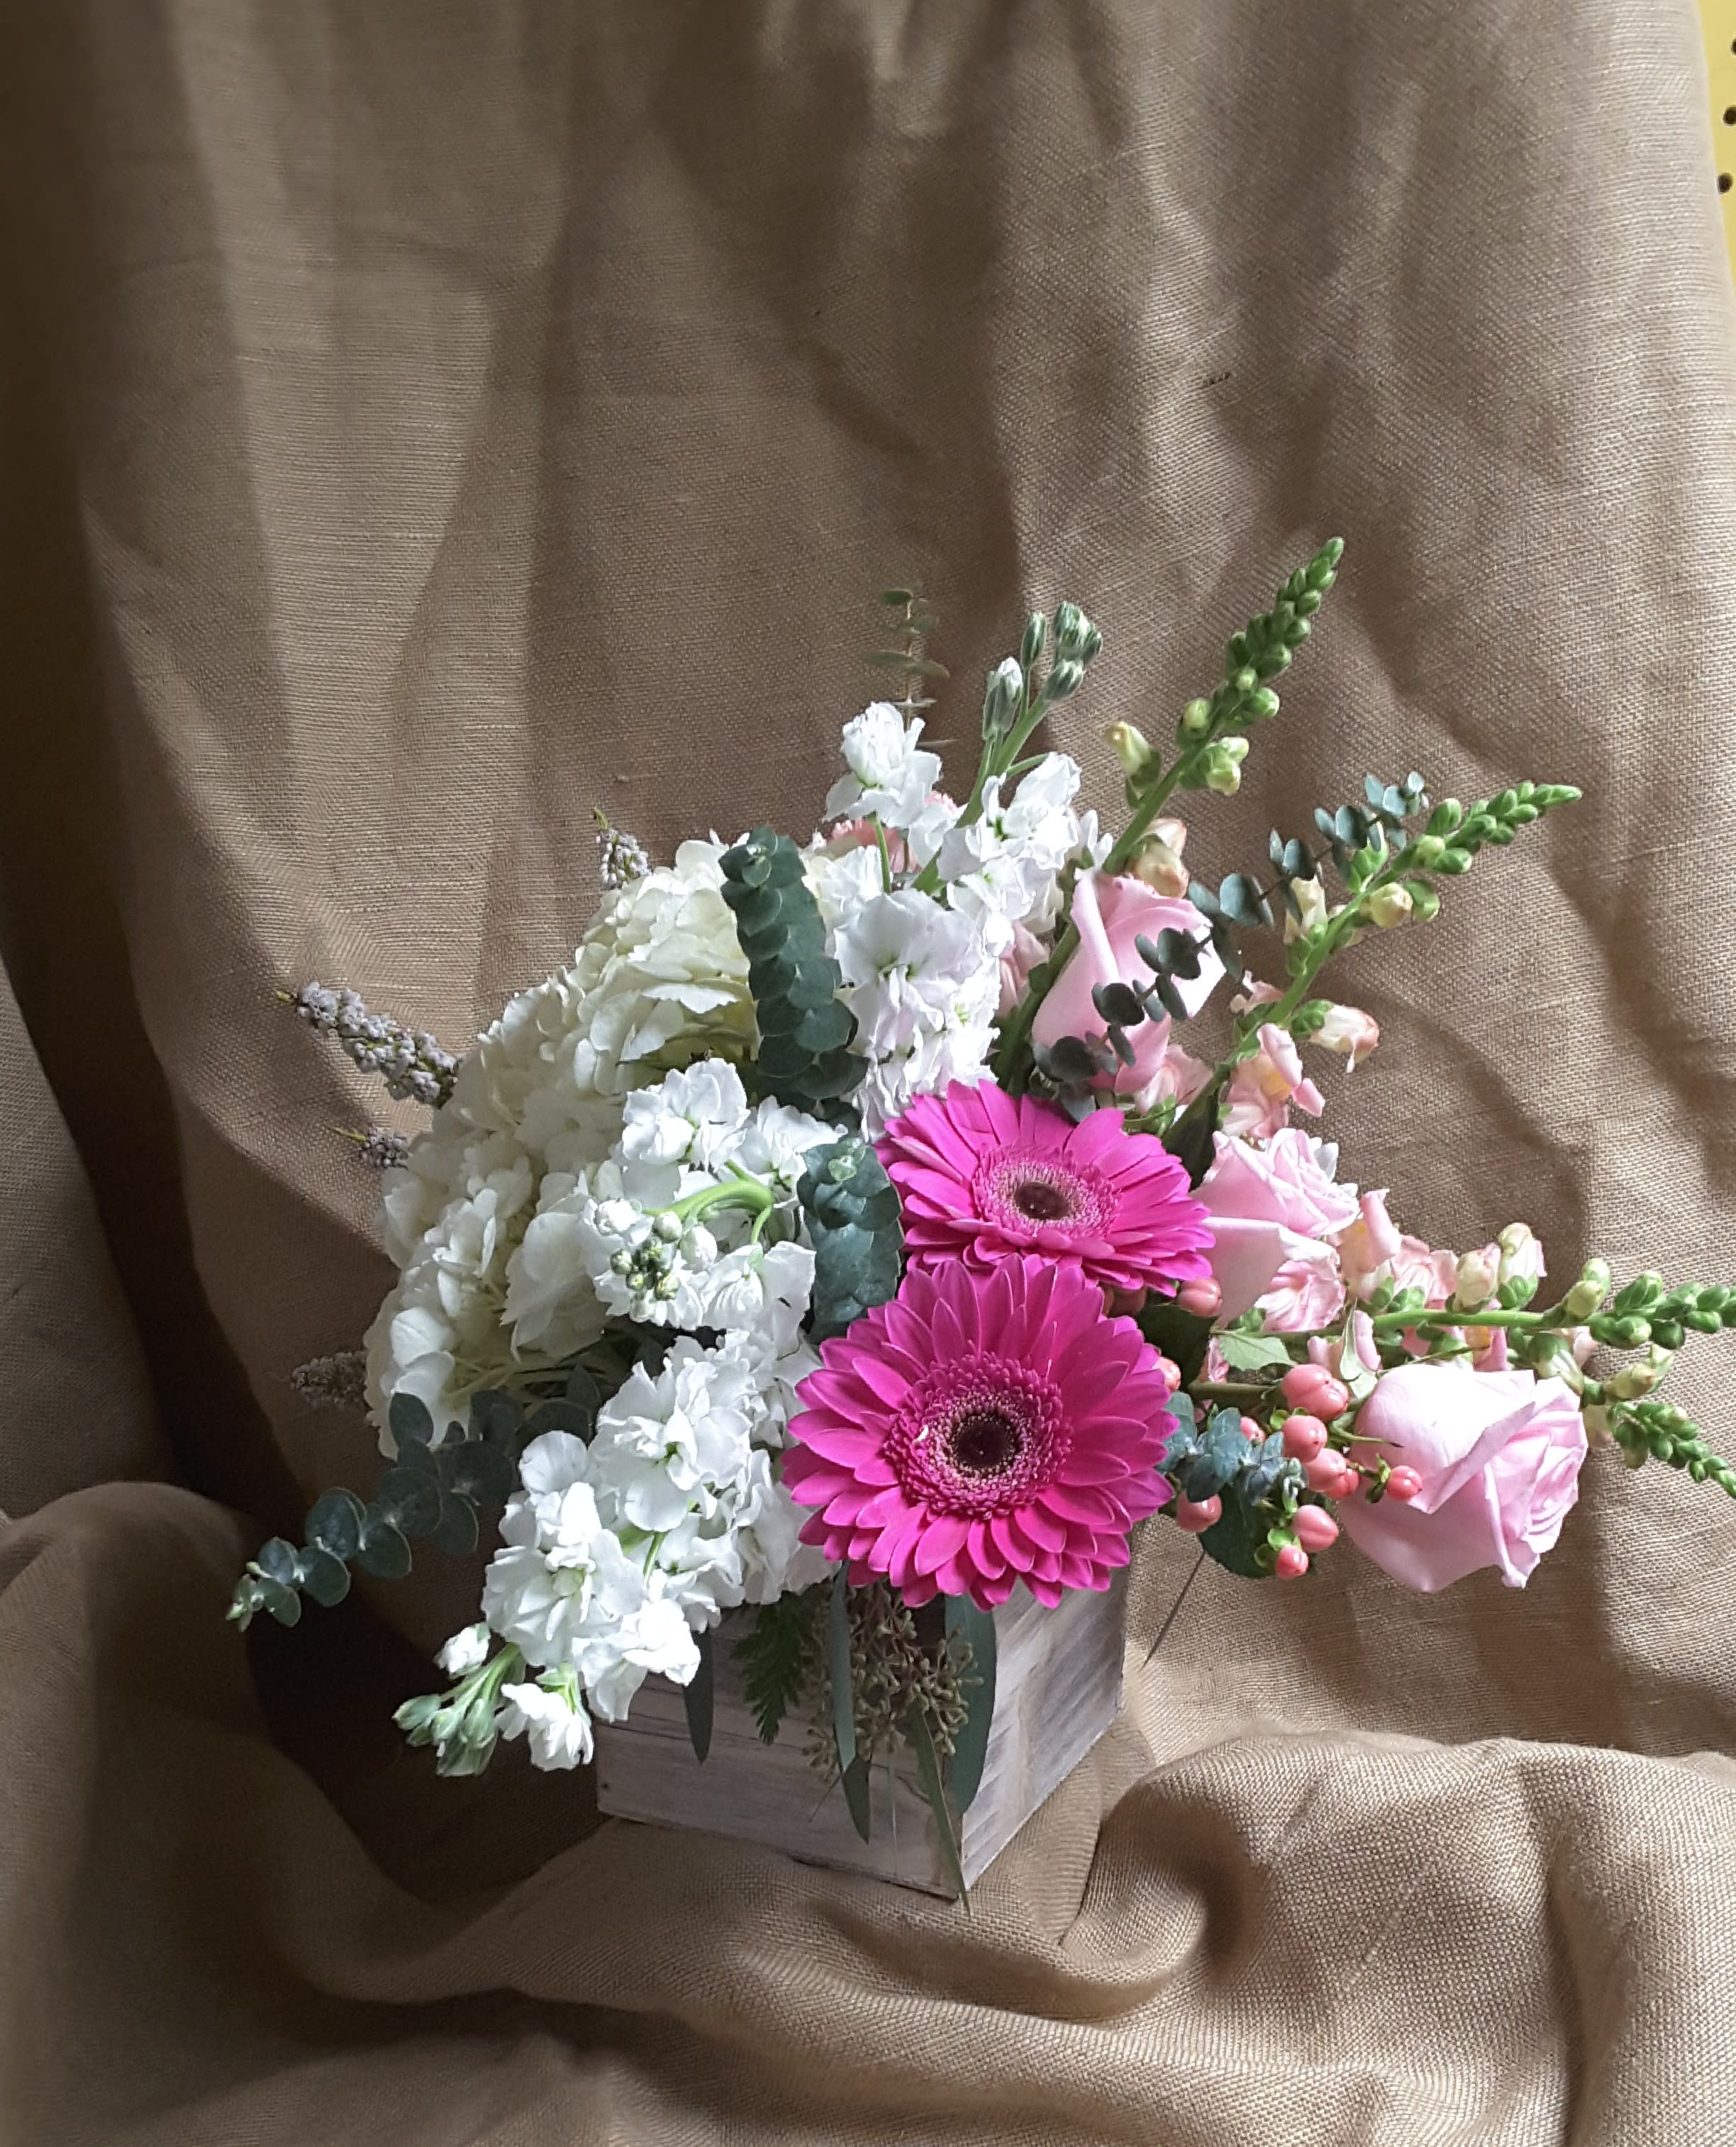 Country  Romance - Pink roses, pink gerberas with white hydrangea, white stock and  pink snap dragons  arranged in  a white washed wooden box  